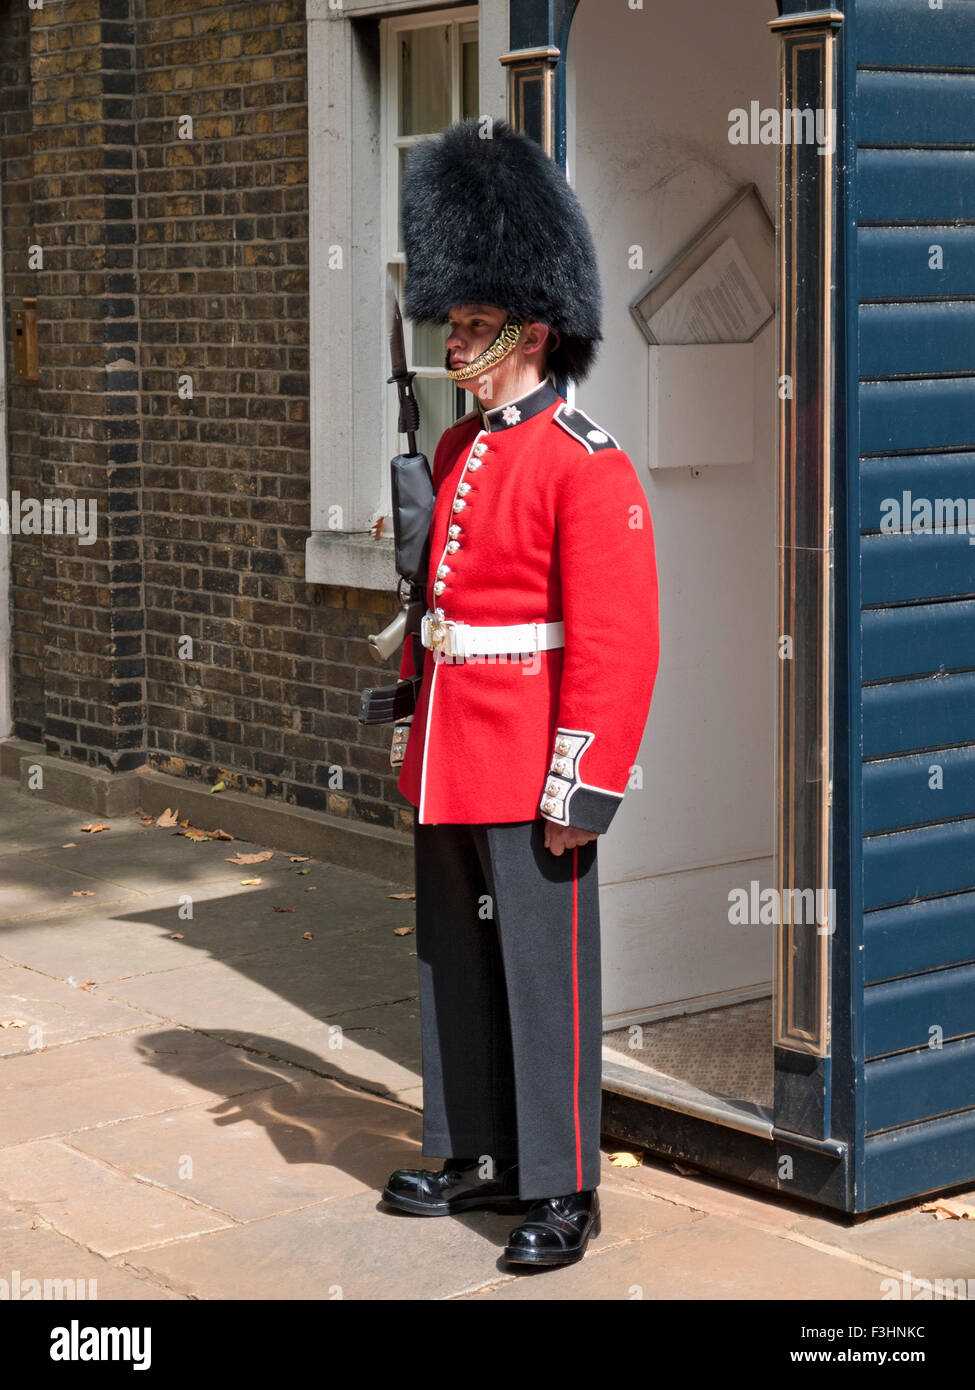 Guard on Royal Guard duties in St James' Palace. The Mall. London. England. Great Britain. Stock Photo